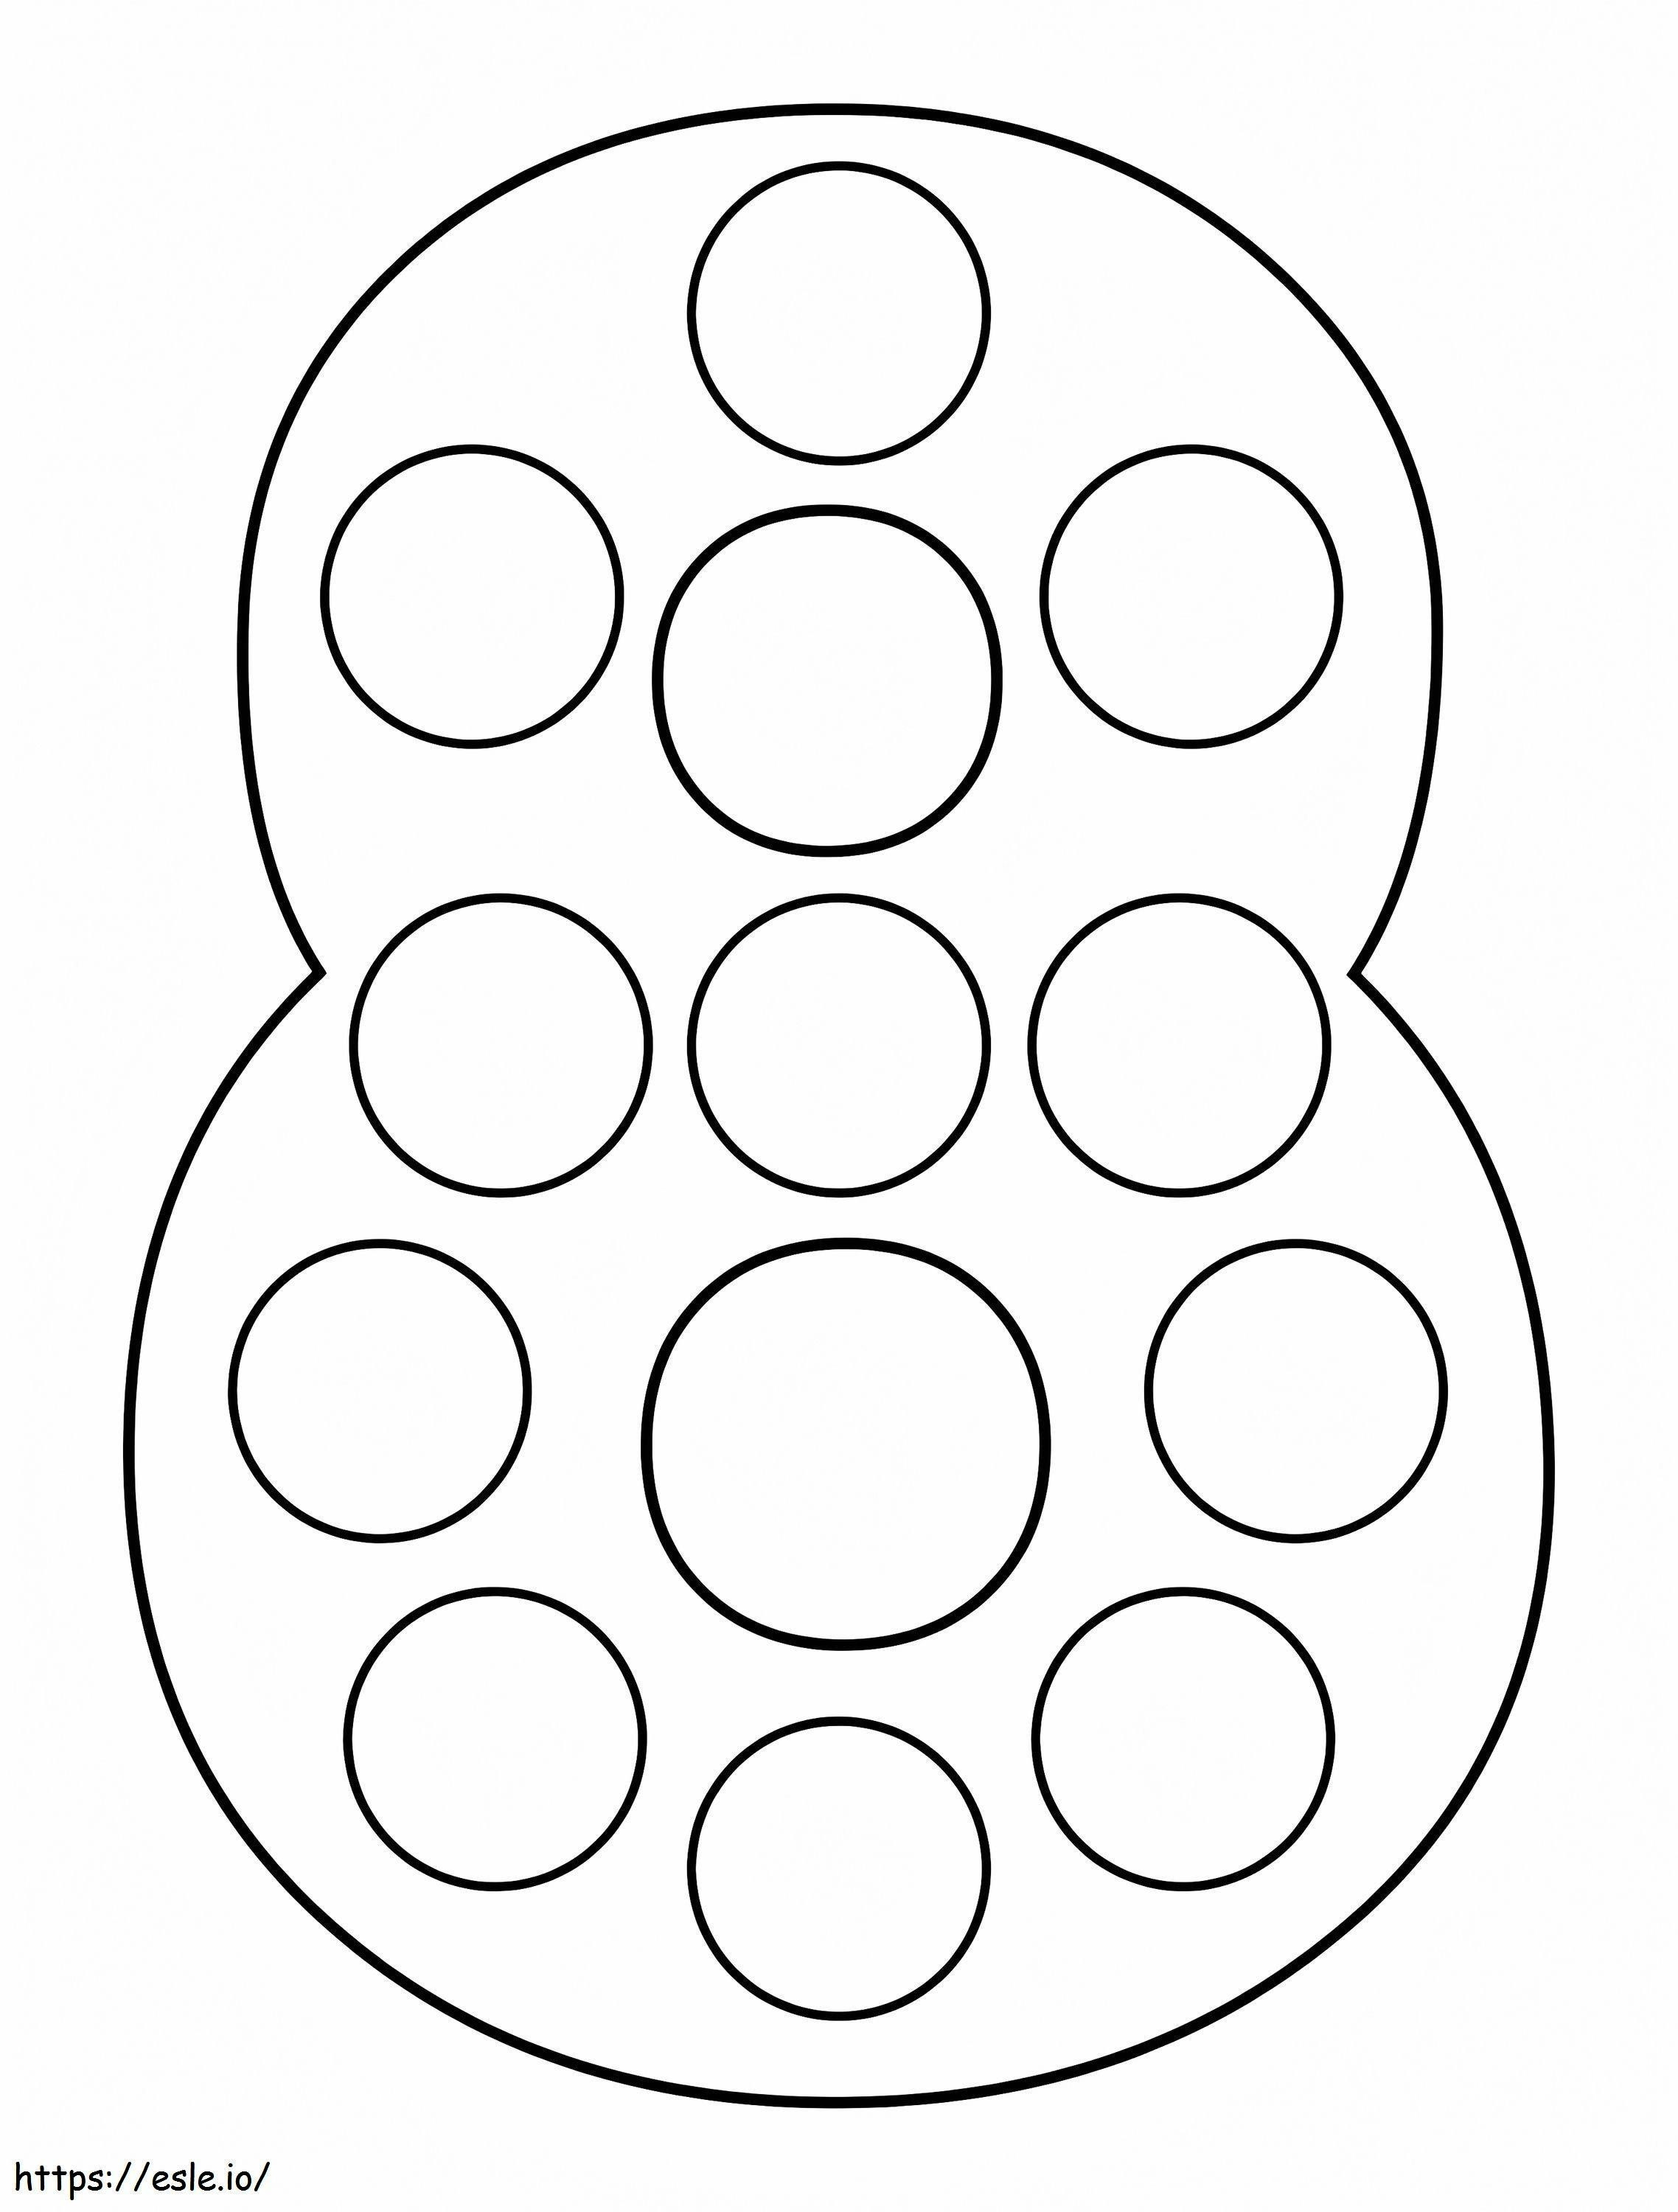 Number 8 Dot Marker coloring page